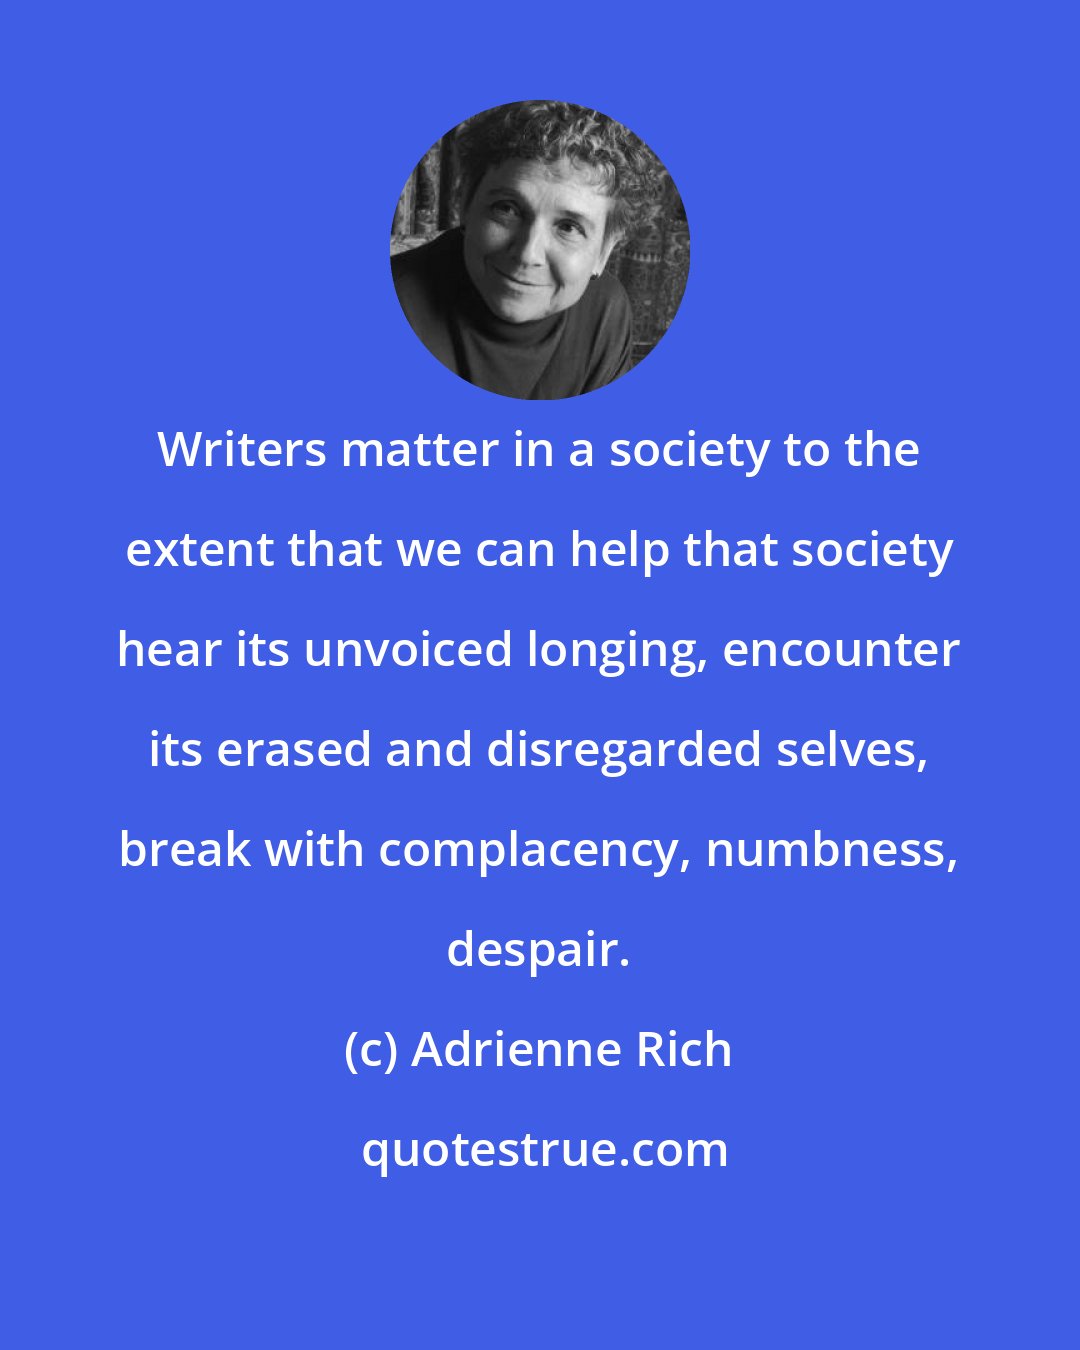 Adrienne Rich: Writers matter in a society to the extent that we can help that society hear its unvoiced longing, encounter its erased and disregarded selves, break with complacency, numbness, despair.